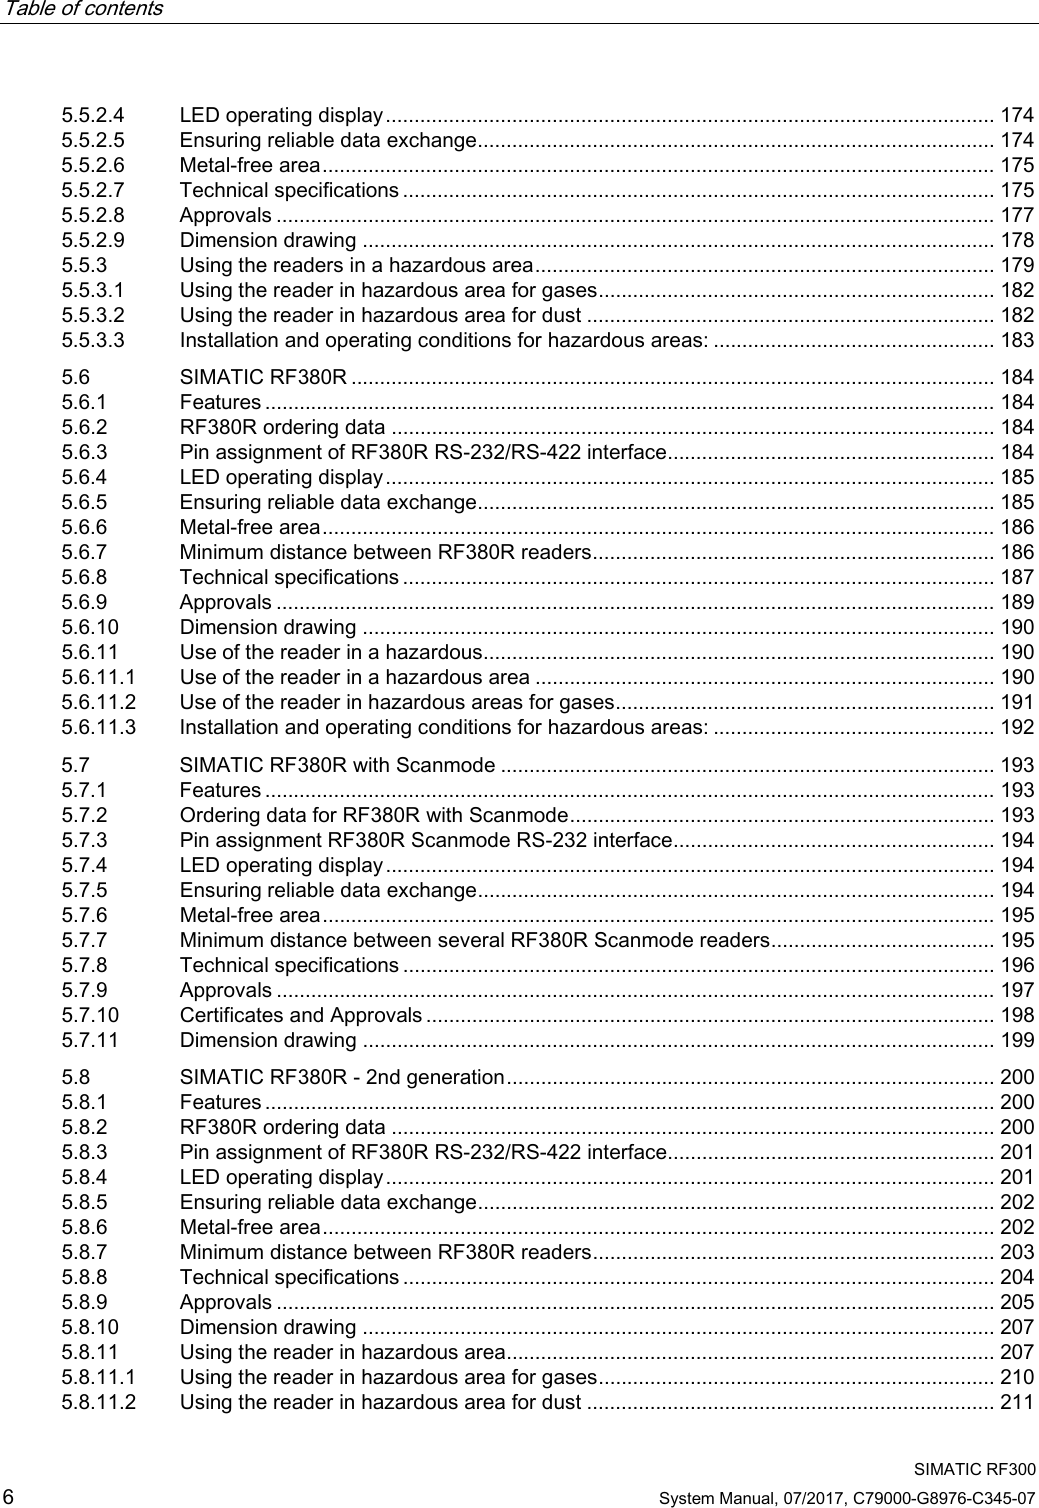 Table of contents     SIMATIC RF300 6 System Manual, 07/2017, C79000-G8976-C345-07 5.5.2.4 LED operating display .......................................................................................................... 174 5.5.2.5 Ensuring reliable data exchange .......................................................................................... 174 5.5.2.6 Metal-free area ..................................................................................................................... 175 5.5.2.7 Technical specifications ....................................................................................................... 175 5.5.2.8 Approvals ............................................................................................................................. 177 5.5.2.9 Dimension drawing .............................................................................................................. 178 5.5.3 Using the readers in a hazardous area ................................................................................ 179 5.5.3.1 Using the reader in hazardous area for gases ..................................................................... 182 5.5.3.2 Using the reader in hazardous area for dust ....................................................................... 182 5.5.3.3 Installation and operating conditions for hazardous areas: ................................................. 183 5.6 SIMATIC RF380R ................................................................................................................ 184 5.6.1 Features ............................................................................................................................... 184 5.6.2 RF380R ordering data ......................................................................................................... 184 5.6.3 Pin assignment of RF380R RS-232/RS-422 interface......................................................... 184 5.6.4 LED operating display .......................................................................................................... 185 5.6.5 Ensuring reliable data exchange .......................................................................................... 185 5.6.6 Metal-free area ..................................................................................................................... 186 5.6.7 Minimum distance between RF380R readers ...................................................................... 186 5.6.8 Technical specifications ....................................................................................................... 187 5.6.9 Approvals ............................................................................................................................. 189 5.6.10 Dimension drawing .............................................................................................................. 190 5.6.11 Use of the reader in a hazardous ......................................................................................... 190 5.6.11.1 Use of the reader in a hazardous area ................................................................................ 190 5.6.11.2 Use of the reader in hazardous areas for gases .................................................................. 191 5.6.11.3 Installation and operating conditions for hazardous areas: ................................................. 192 5.7 SIMATIC RF380R with Scanmode ...................................................................................... 193 5.7.1 Features ............................................................................................................................... 193 5.7.2 Ordering data for RF380R with Scanmode .......................................................................... 193 5.7.3 Pin assignment RF380R Scanmode RS-232 interface........................................................ 194 5.7.4 LED operating display .......................................................................................................... 194 5.7.5 Ensuring reliable data exchange .......................................................................................... 194 5.7.6 Metal-free area ..................................................................................................................... 195 5.7.7 Minimum distance between several RF380R Scanmode readers ....................................... 195 5.7.8 Technical specifications ....................................................................................................... 196 5.7.9 Approvals ............................................................................................................................. 197 5.7.10 Certificates and Approvals ................................................................................................... 198 5.7.11 Dimension drawing .............................................................................................................. 199 5.8 SIMATIC RF380R - 2nd generation ..................................................................................... 200 5.8.1 Features ............................................................................................................................... 200 5.8.2 RF380R ordering data ......................................................................................................... 200 5.8.3 Pin assignment of RF380R RS-232/RS-422 interface......................................................... 201 5.8.4 LED operating display .......................................................................................................... 201 5.8.5 Ensuring reliable data exchange .......................................................................................... 202 5.8.6 Metal-free area ..................................................................................................................... 202 5.8.7 Minimum distance between RF380R readers ...................................................................... 203 5.8.8 Technical specifications ....................................................................................................... 204 5.8.9 Approvals ............................................................................................................................. 205 5.8.10 Dimension drawing .............................................................................................................. 207 5.8.11 Using the reader in hazardous area..................................................................................... 207 5.8.11.1 Using the reader in hazardous area for gases ..................................................................... 210 5.8.11.2 Using the reader in hazardous area for dust ....................................................................... 211 